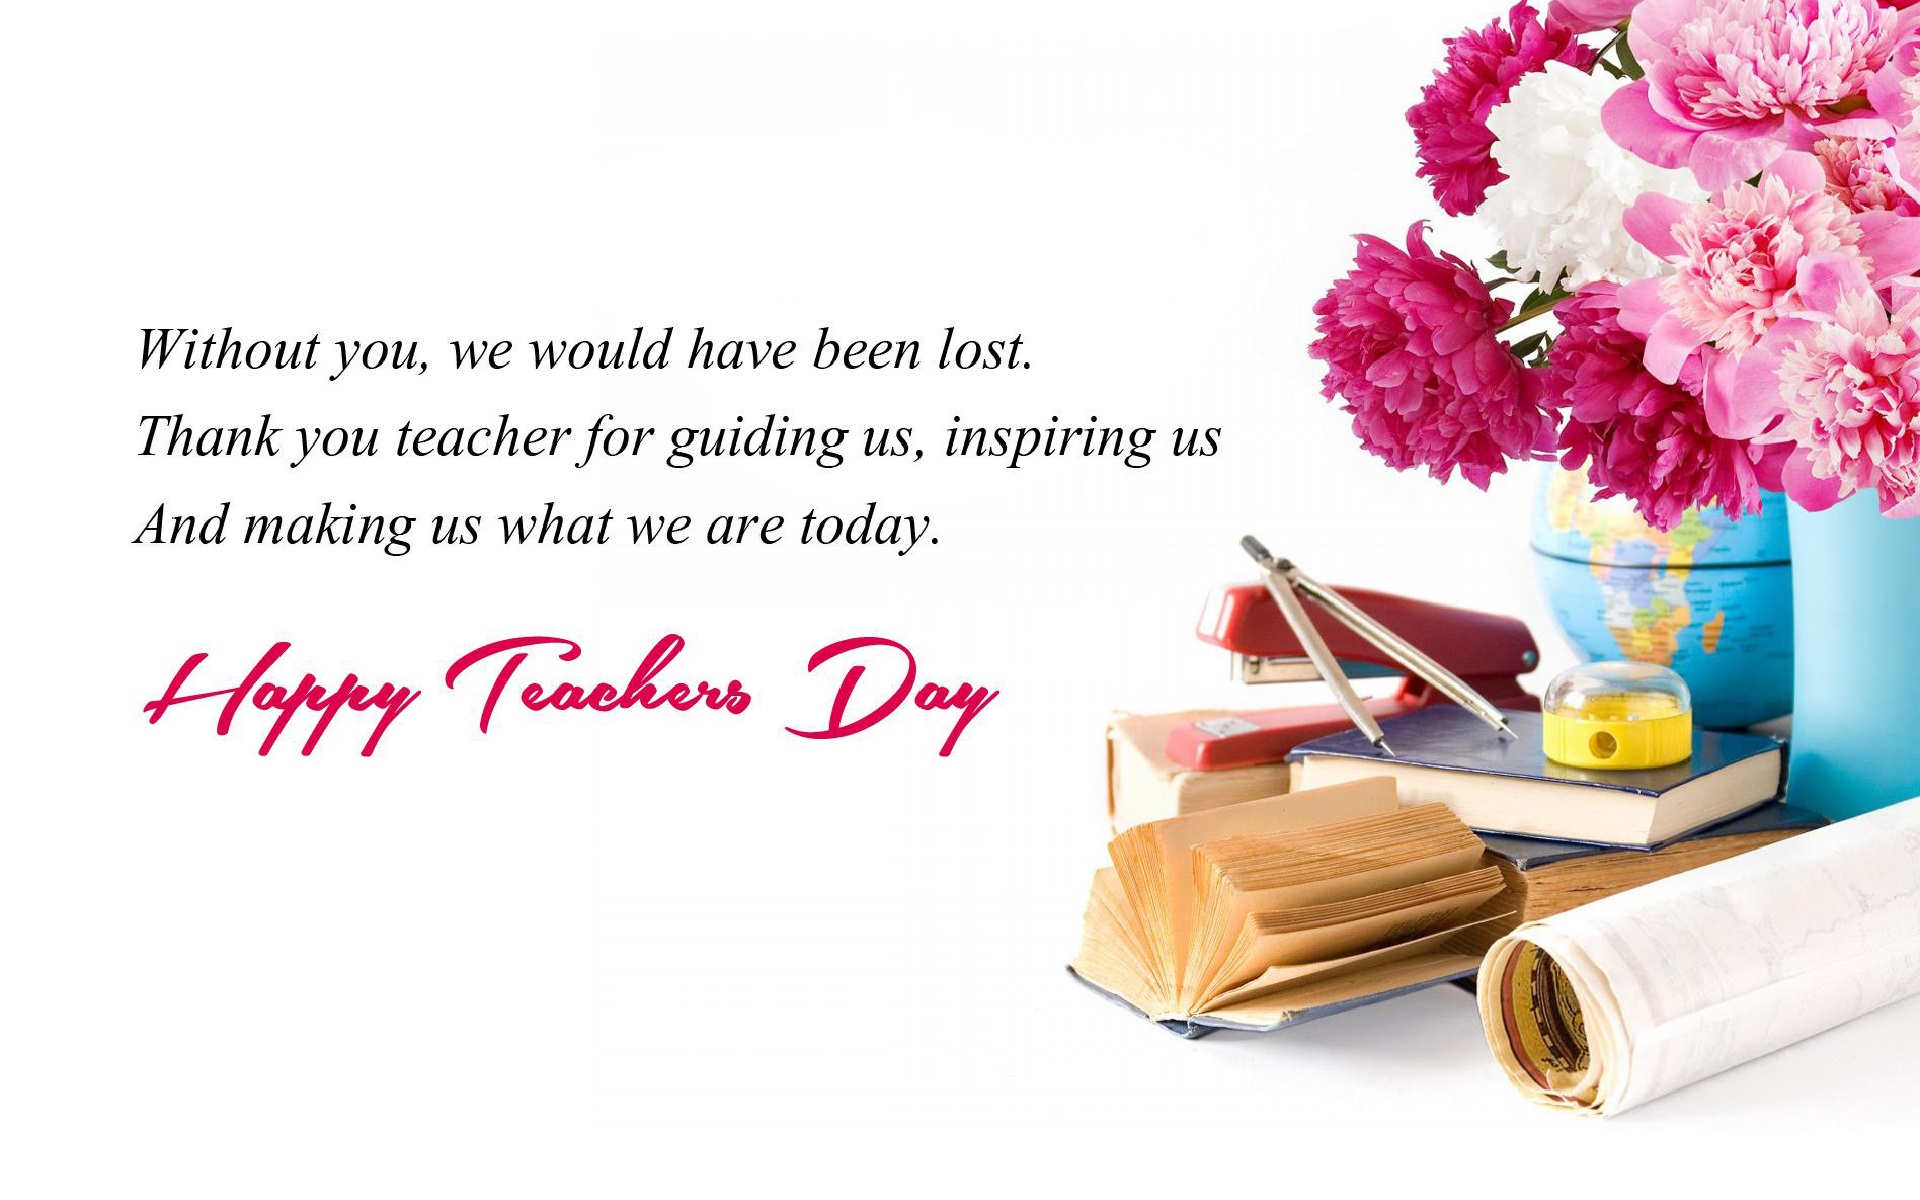 Happy Teachers Day Images & Pictures free download